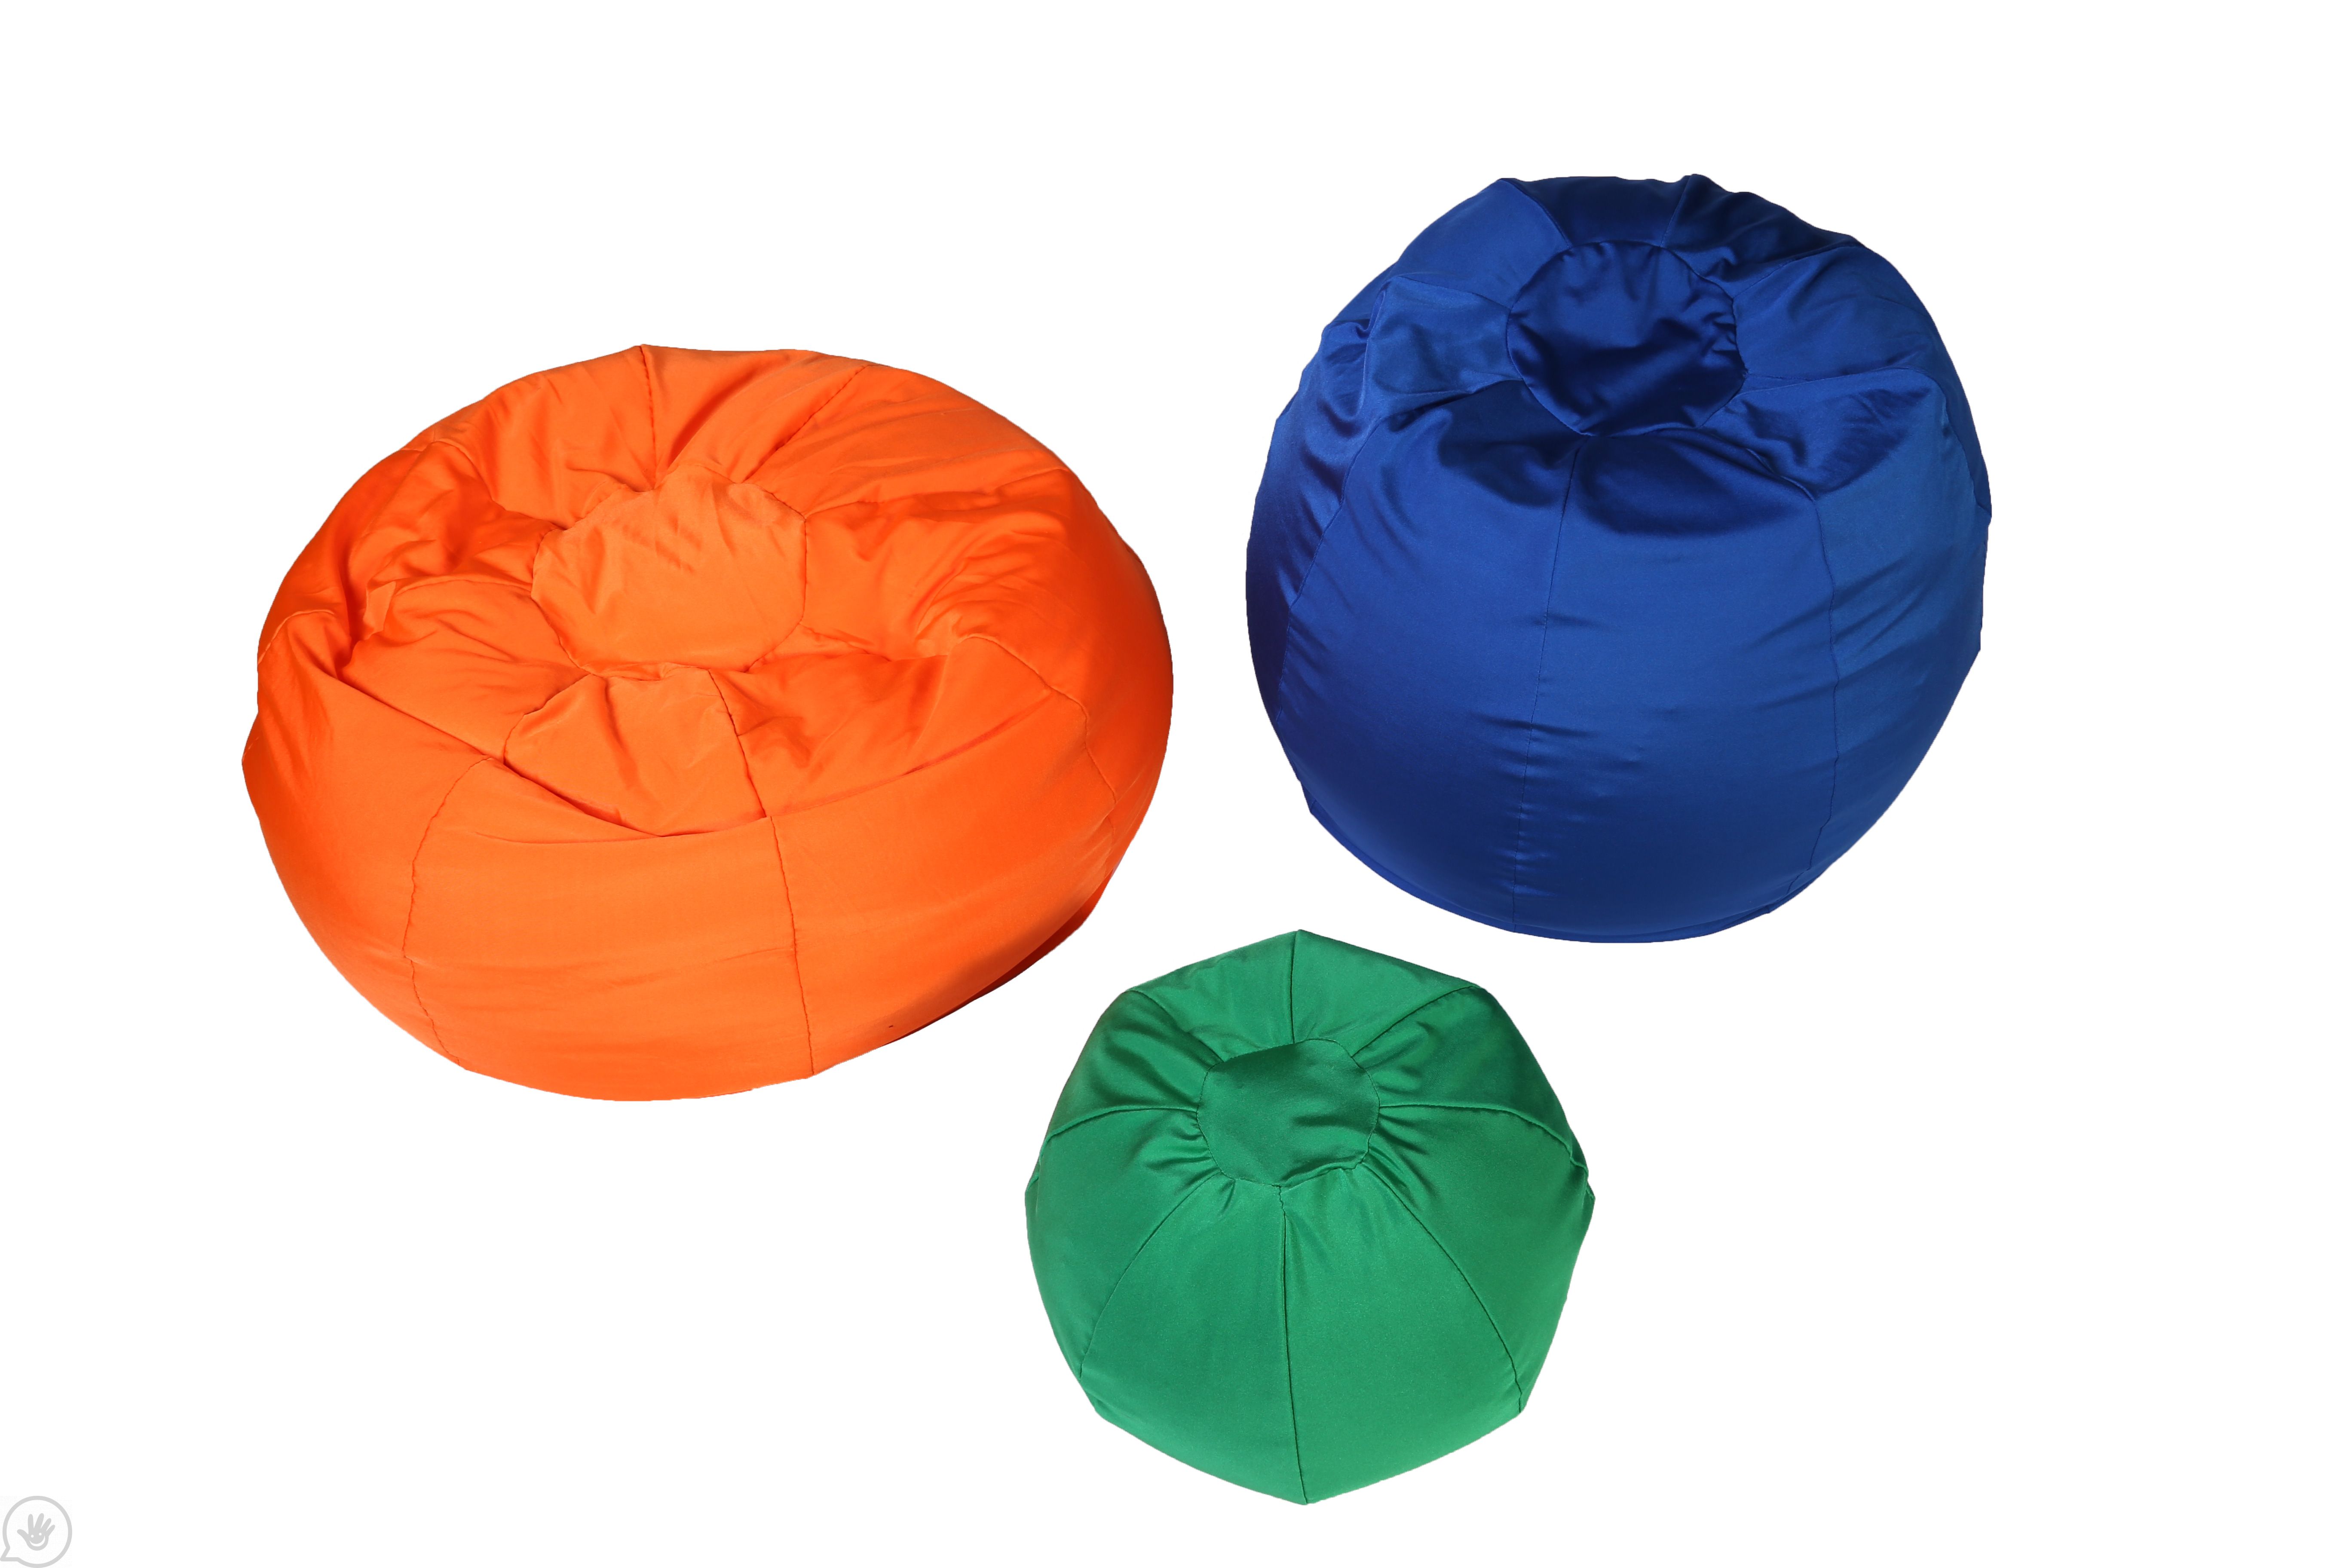 Original: the nylon beanbag that started it all | Fatboy